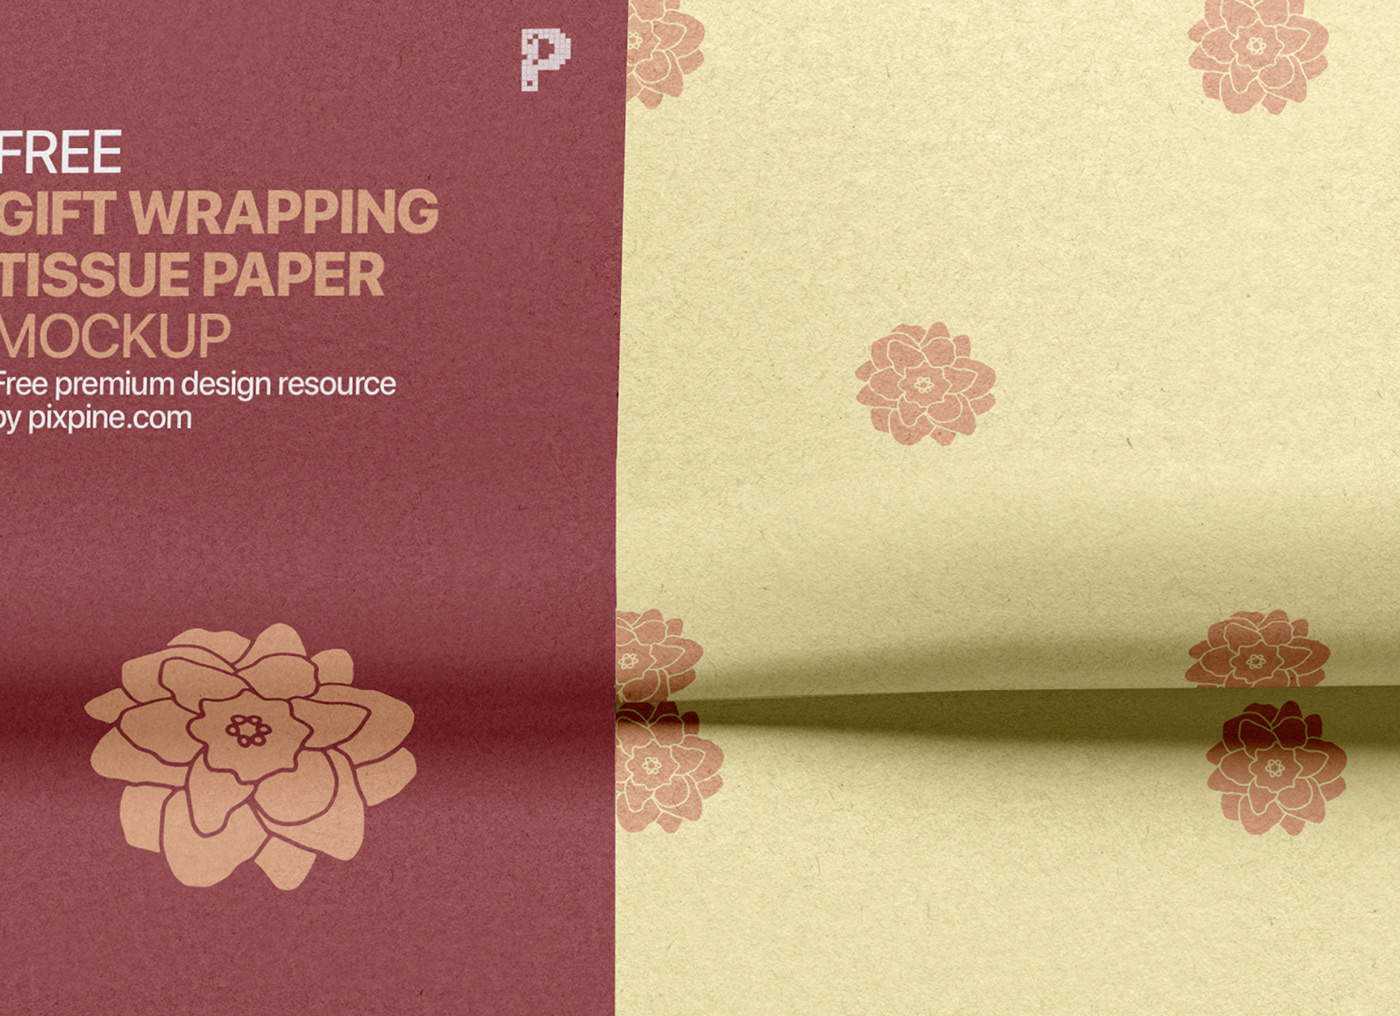 branding  design etsy free gift wrapping sheet Mockup pattern design  psd template surface design wrapping tissue paper